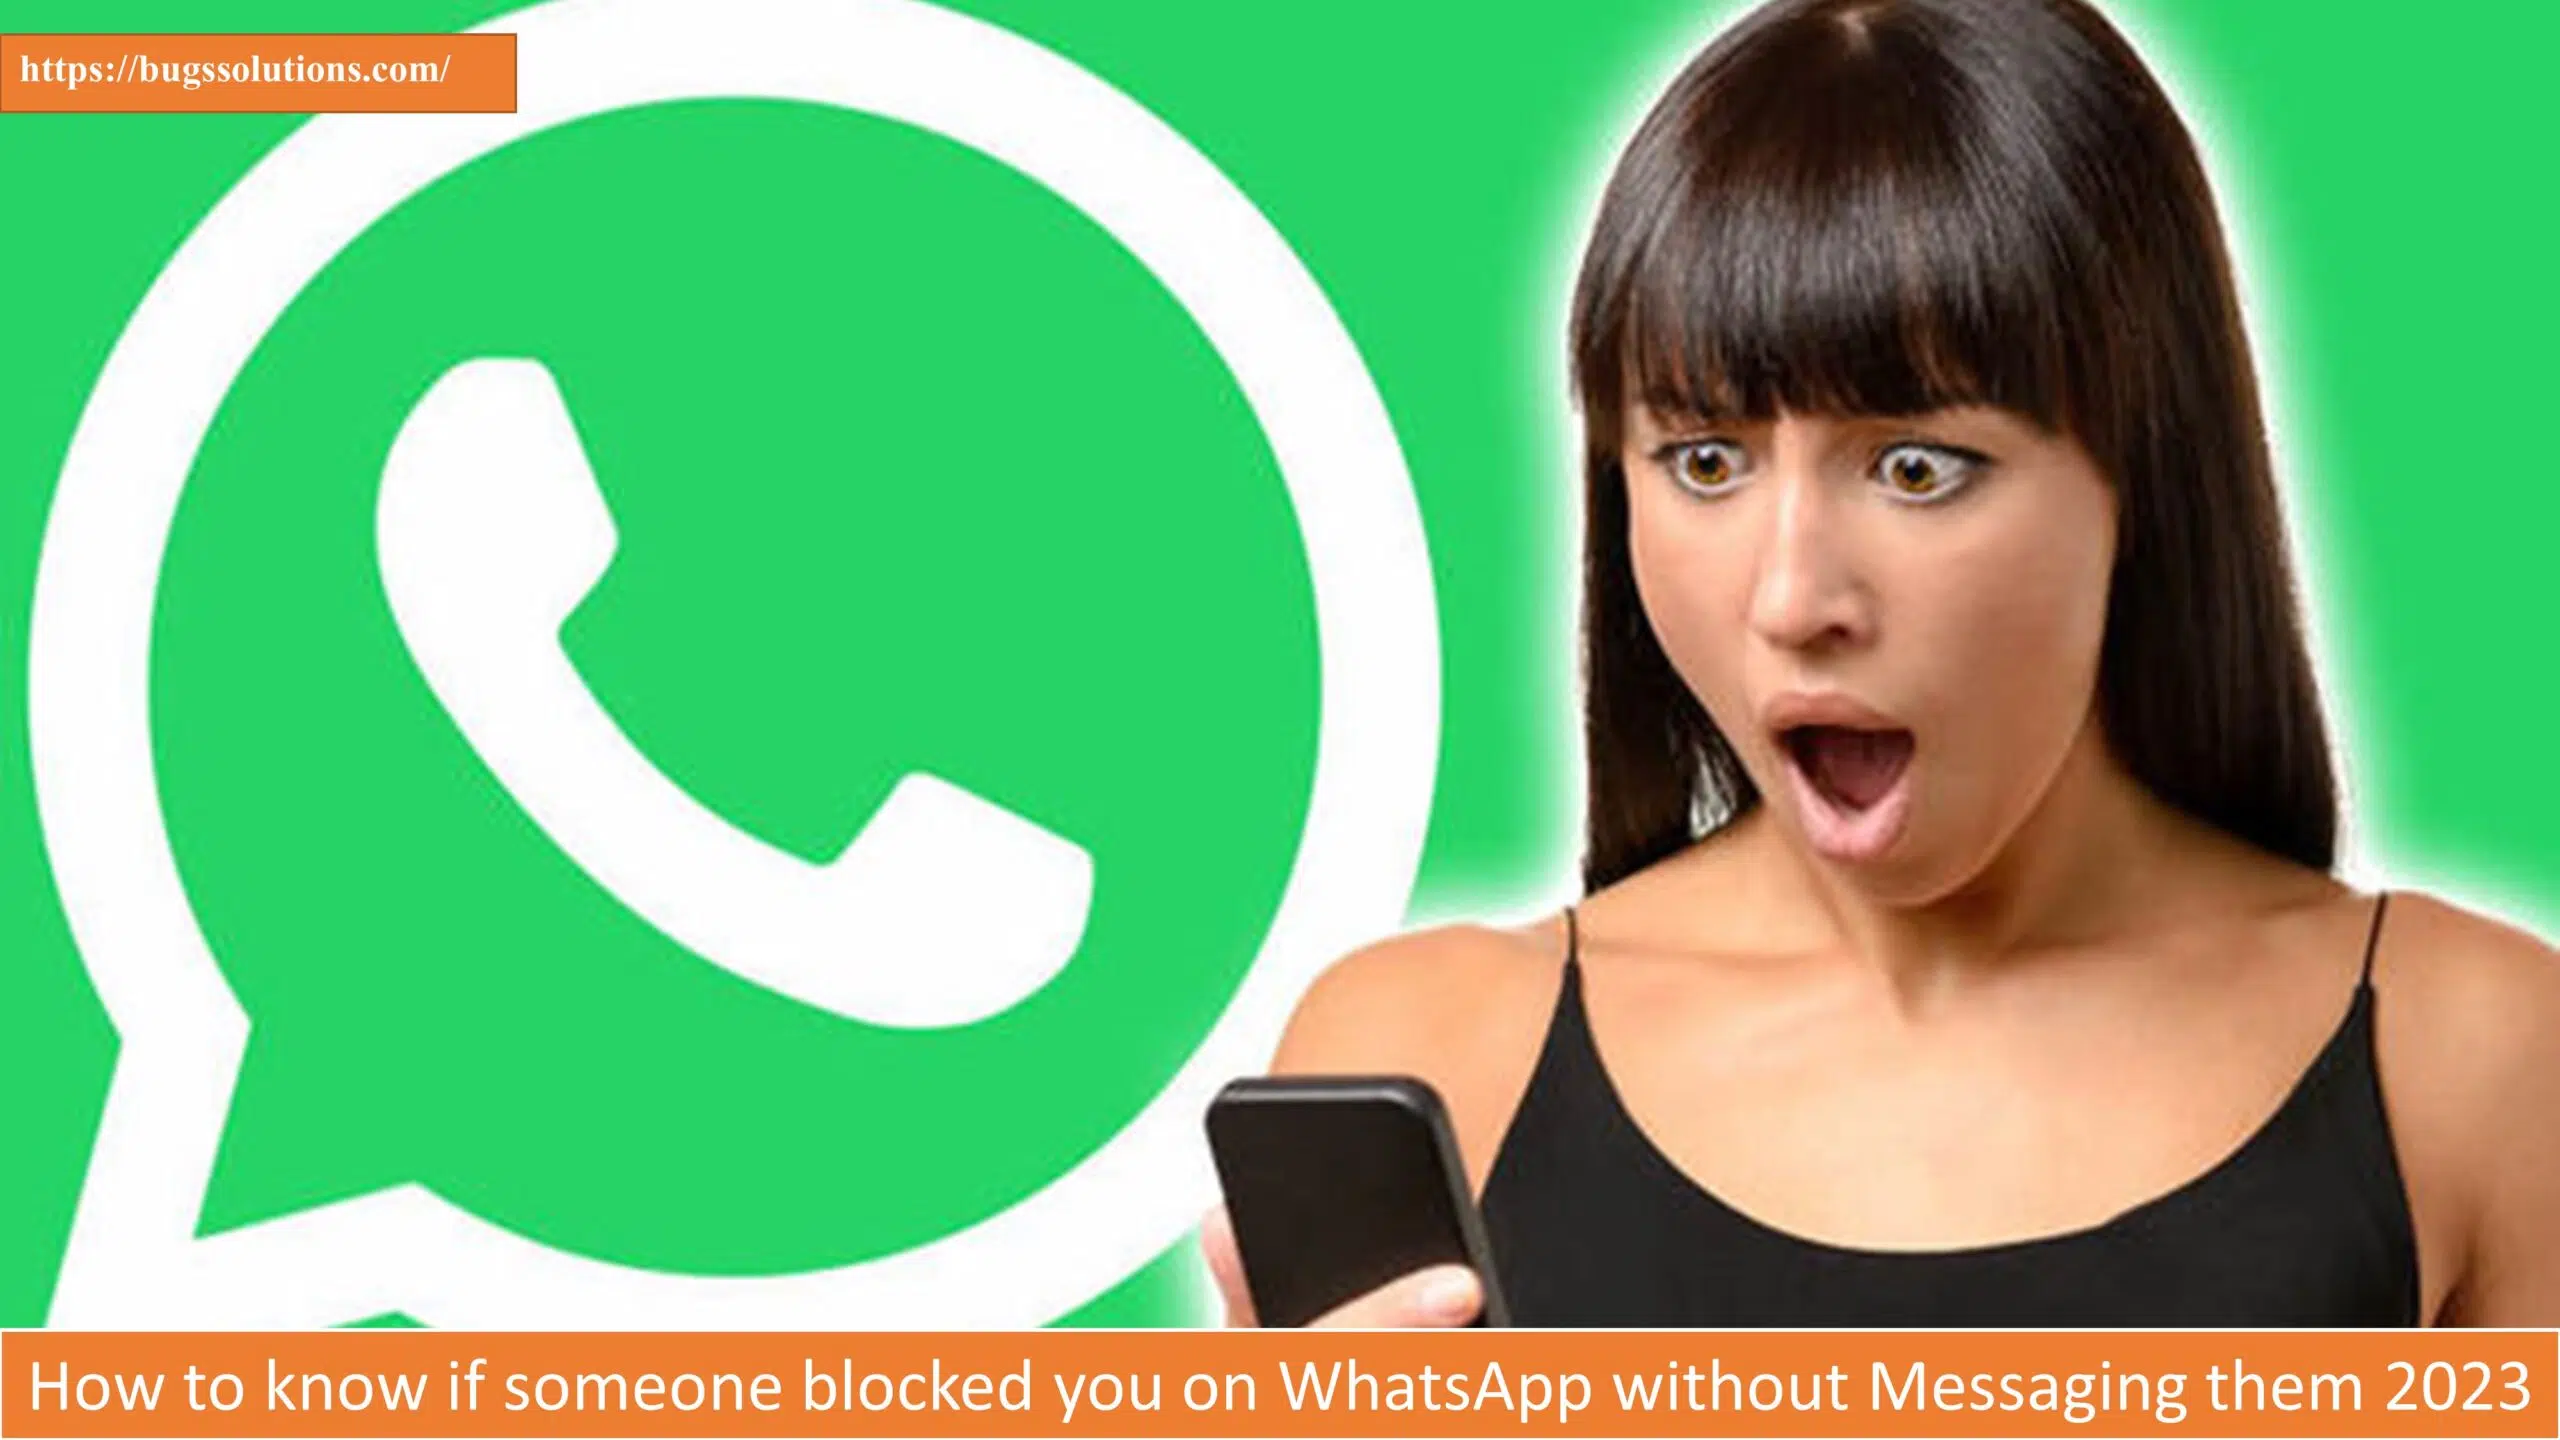 How to know if someone blocked you on WhatsApp without Messaging them 2023